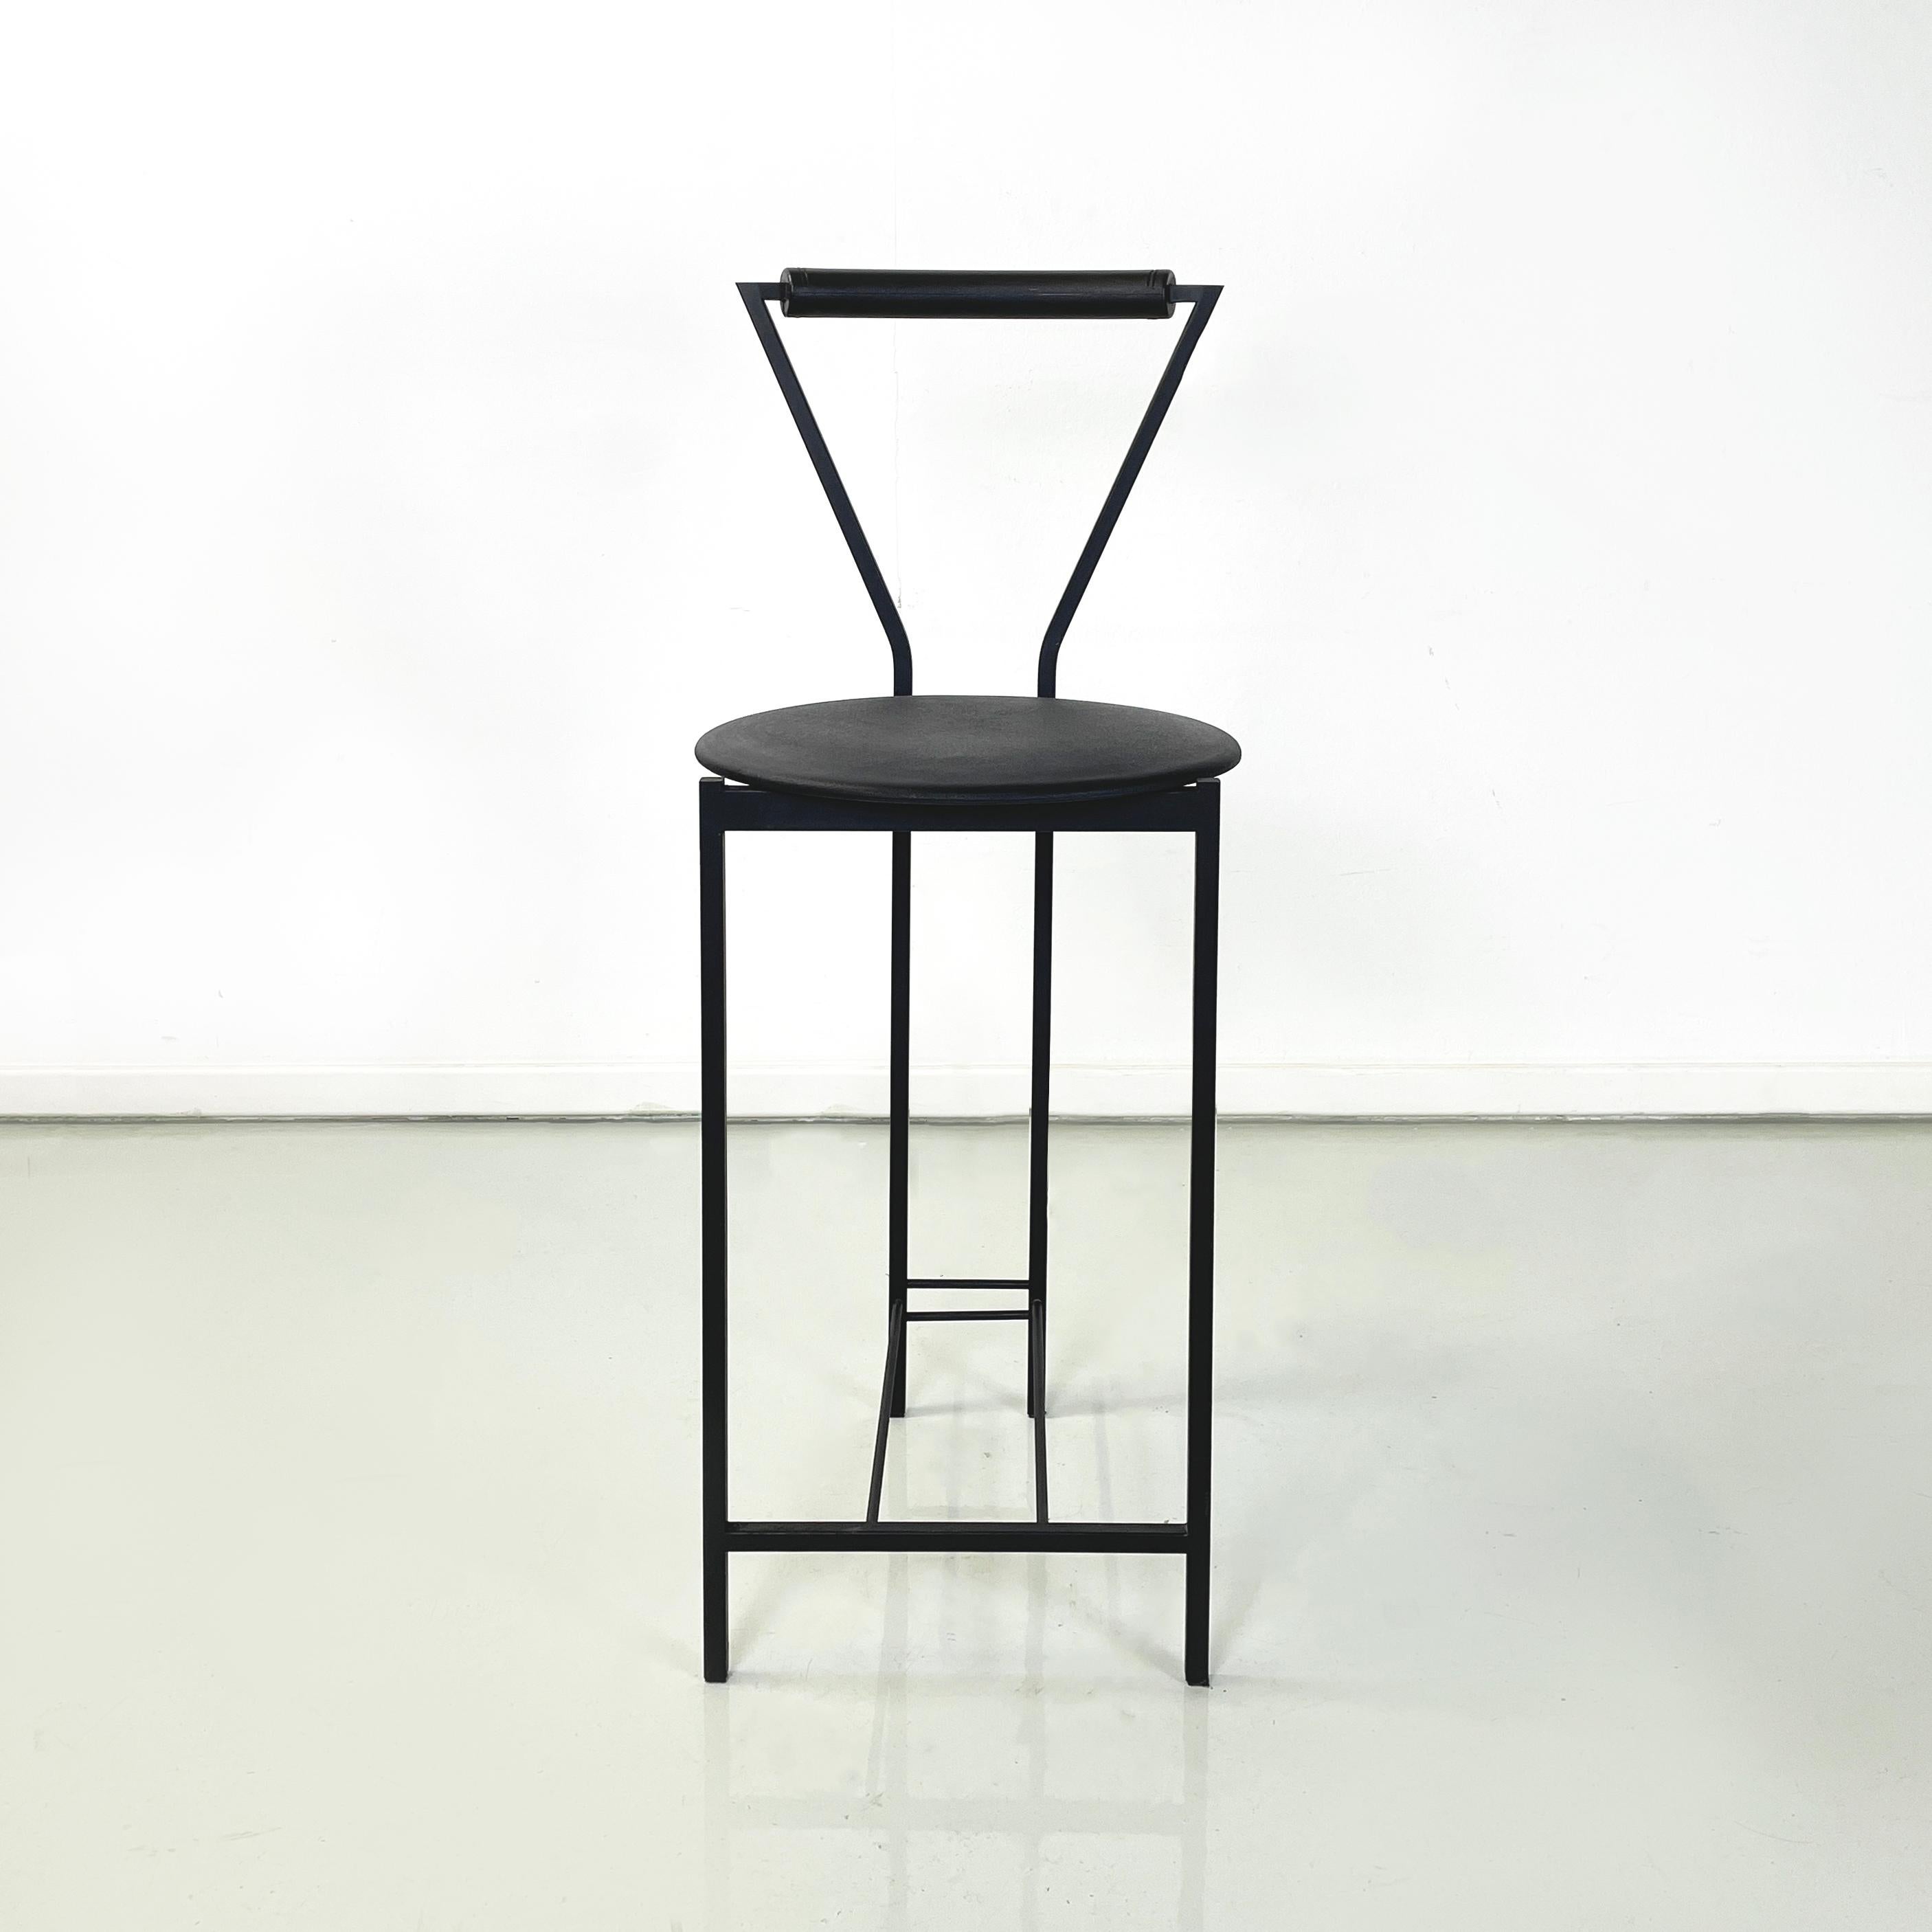 Italian modern high stool in black metal and rubber, 1980s
High bar stool with round seat in black rubber. The backrest is composed of a black painted metal structure with a square section, wrapped in the upper part by a black rubber cylinder. Black